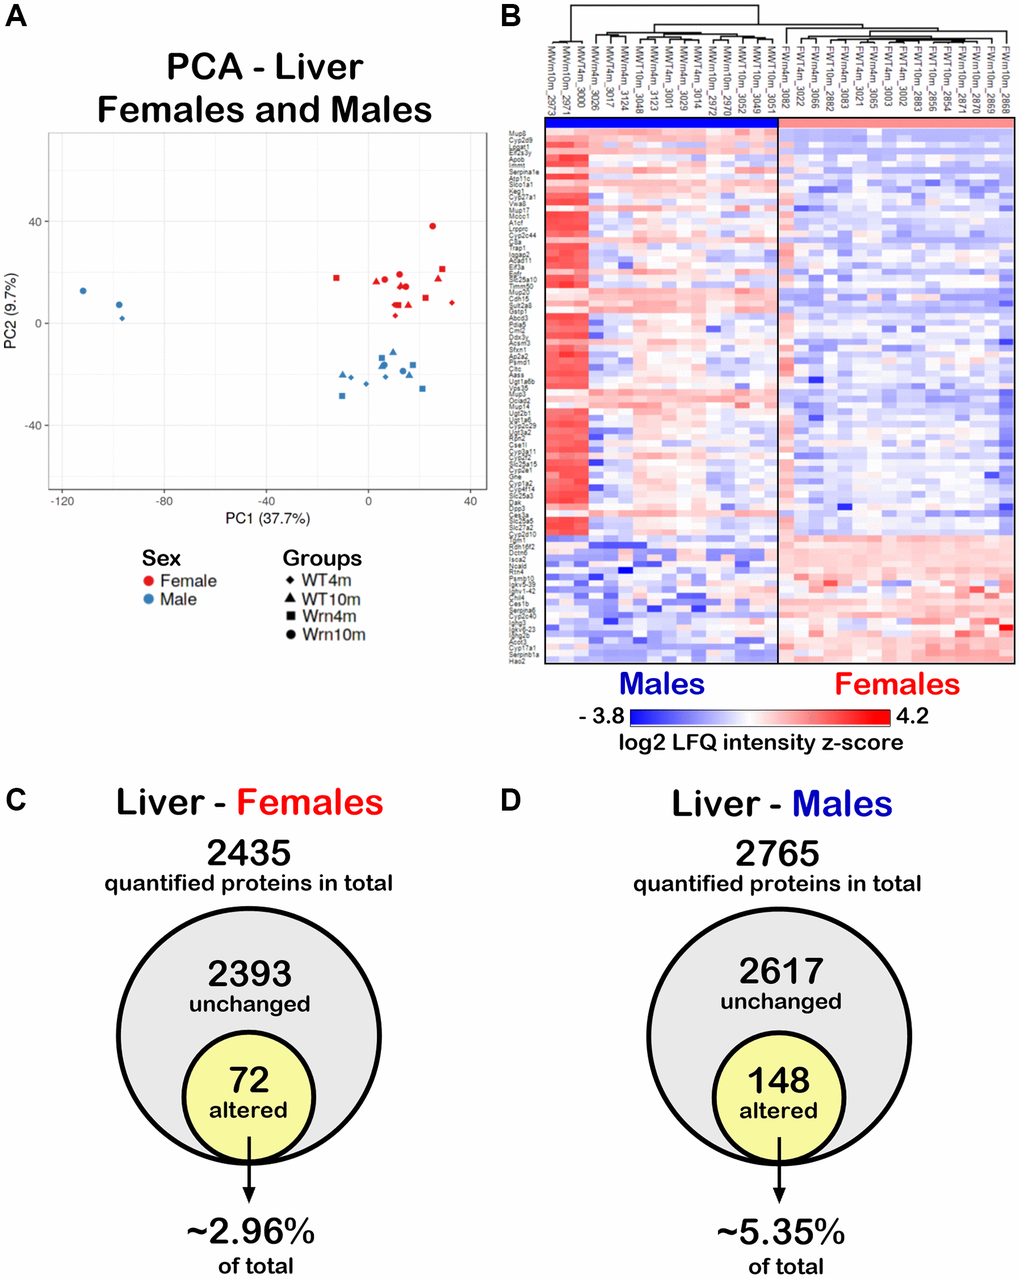 Impact of sexual dimorphism on the liver proteome profiles of wild type and WrnΔhel/Δhel mice at four and ten months of age. (A) Principal component analysis (PCA) graph of all wild type and WrnΔhel/Δhel mice at four and ten months of age. (B) Heatmap depicting the Z-score value of log base 2 of liver protein (rows) between individual (columns) wild type and WrnΔhel/Δhel that significantly separated females and males. (C) Venn diagram presenting the number of quantified proteins that were unchanged or altered between the different groups of females. (D) Venn diagram presenting the number of quantified proteins that were unchanged or altered between the different groups of males.